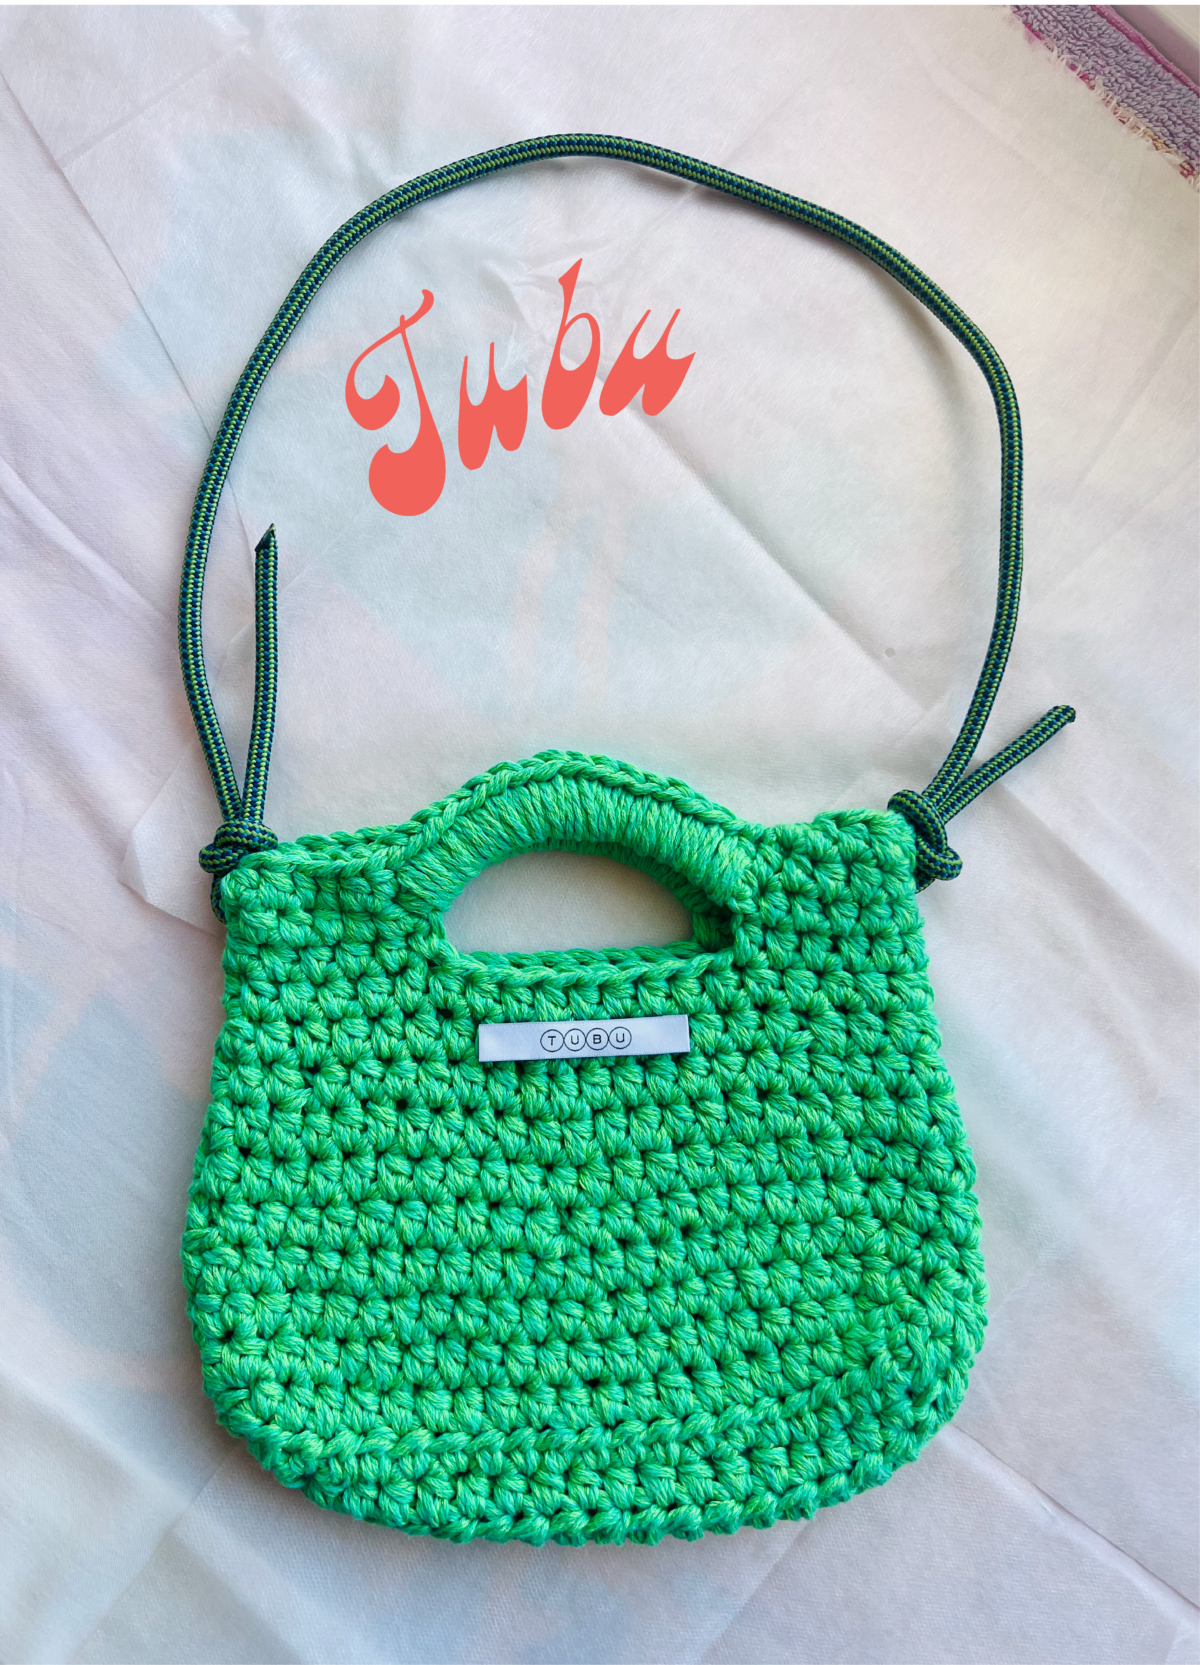 An acidic green crocheted bag with a drawstring made of discarded climbing rope.